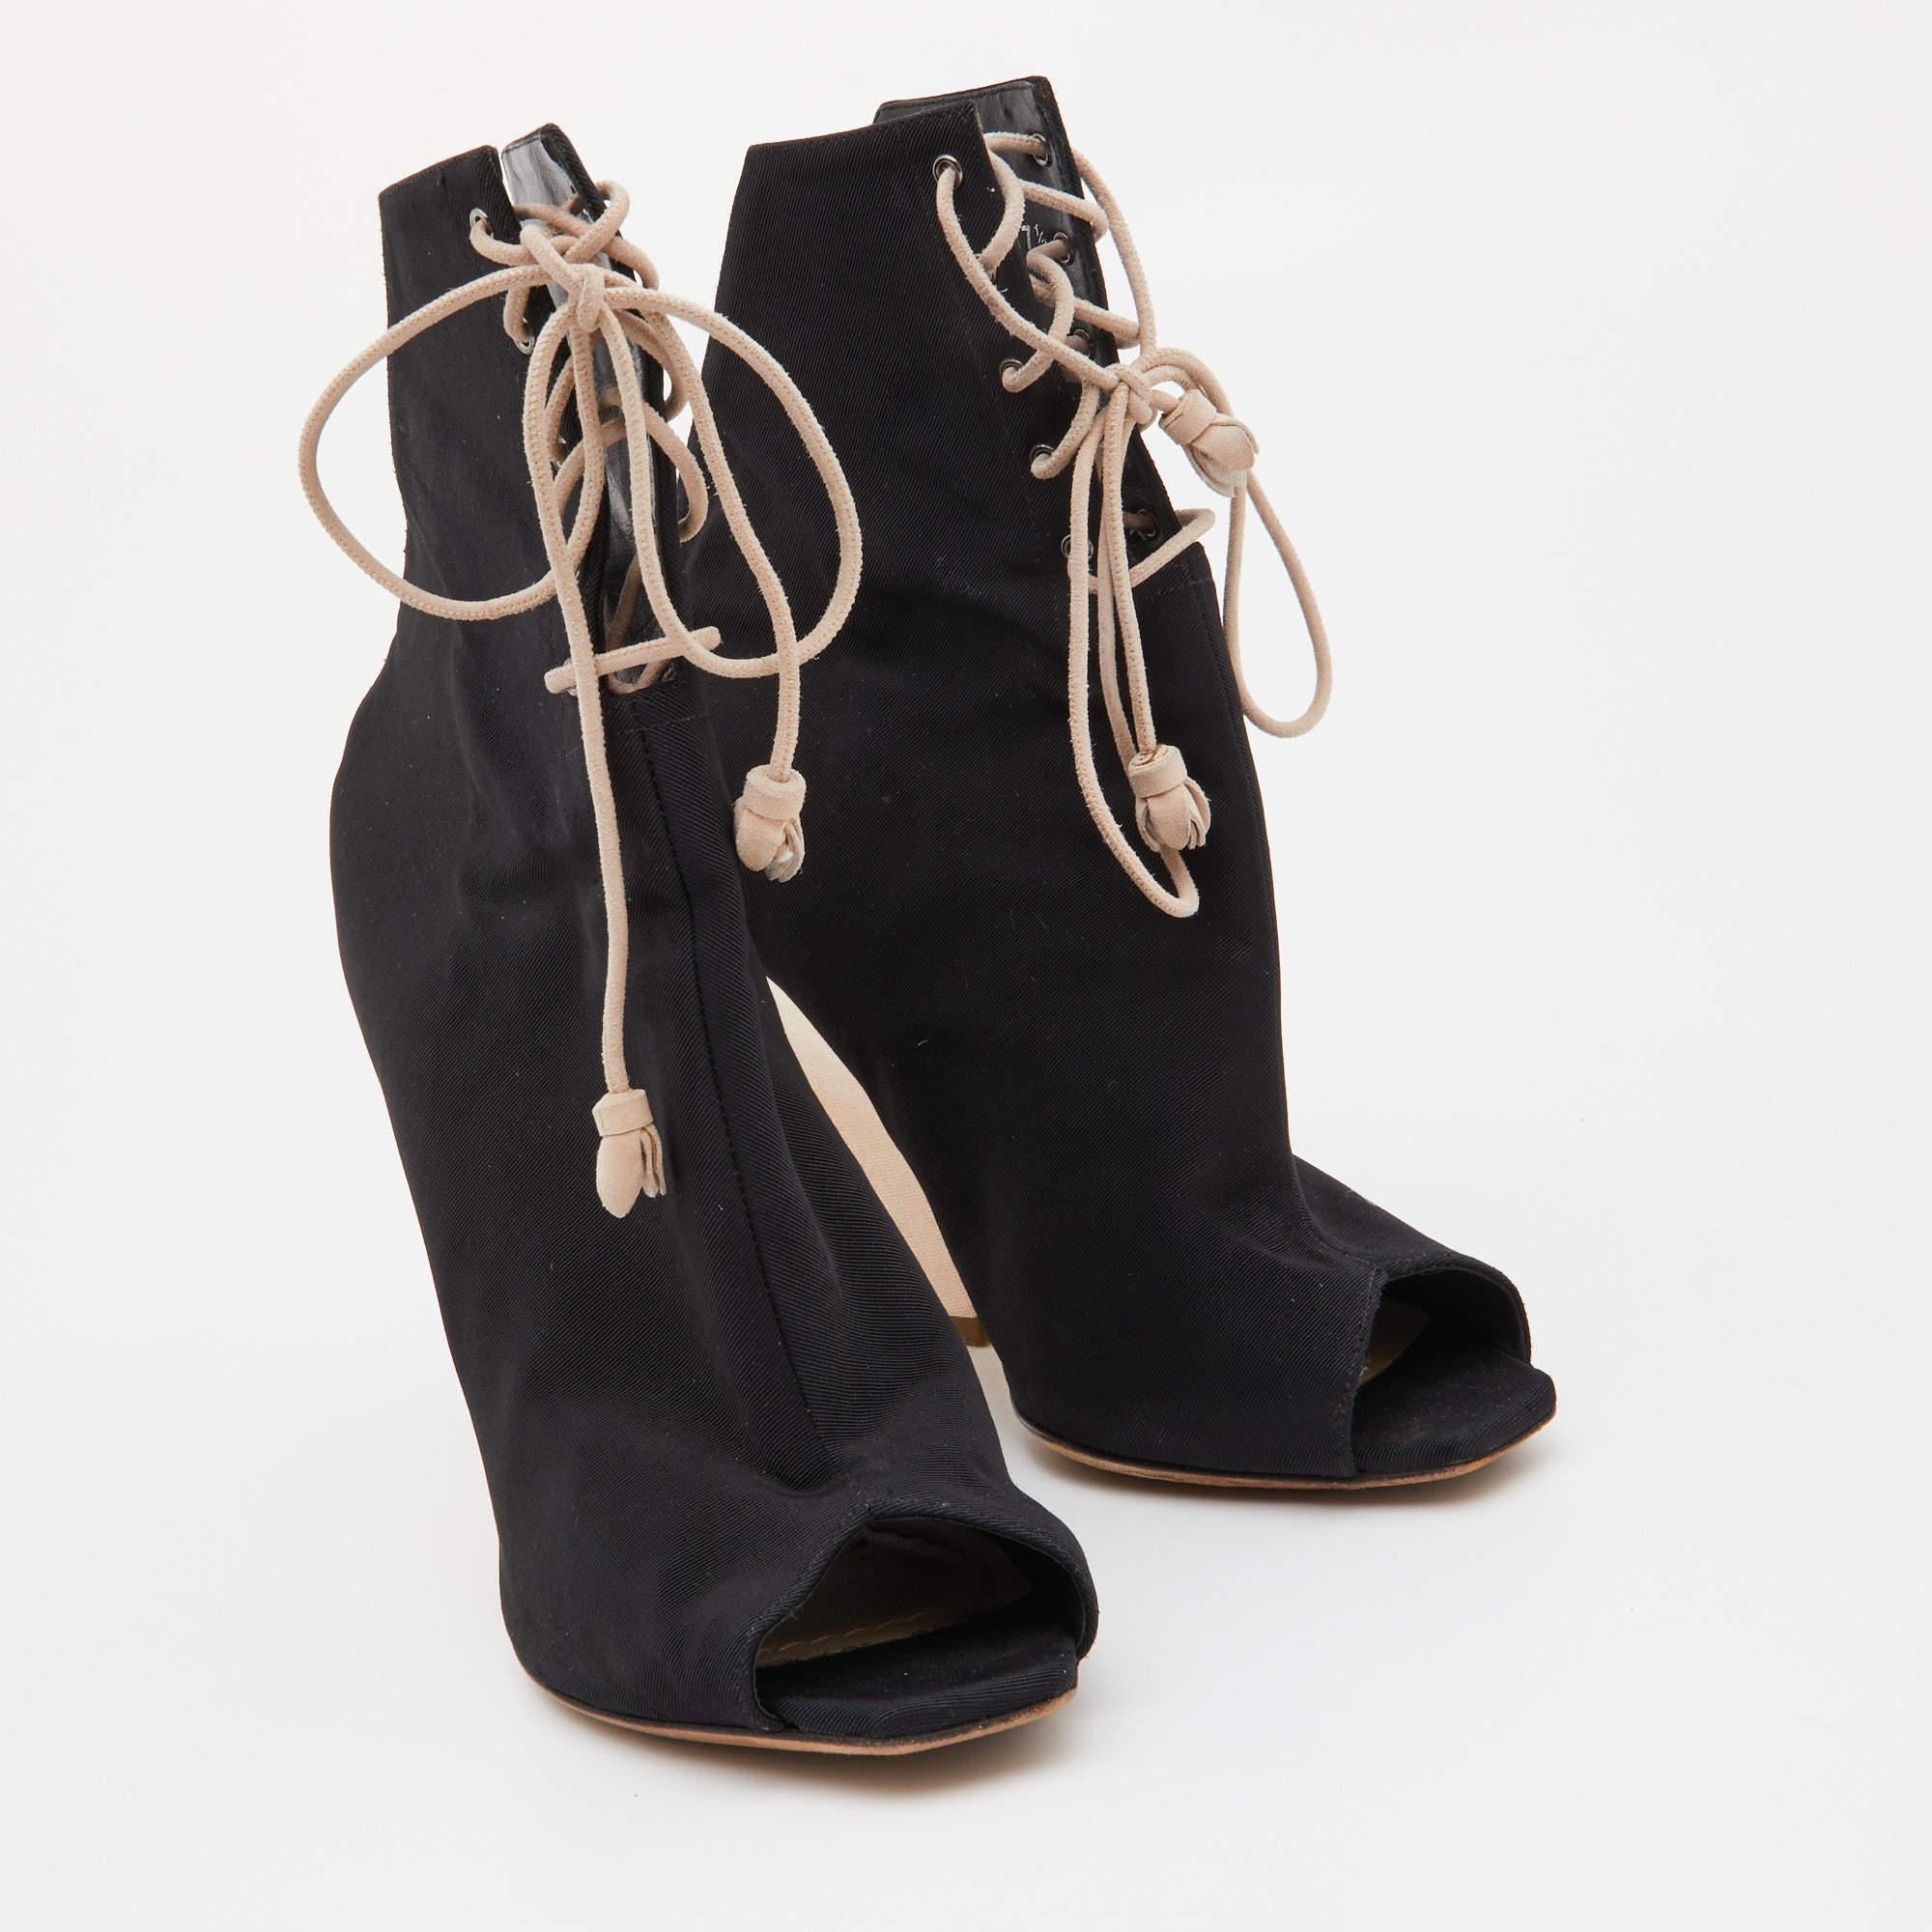 Dior Black Canvas Open Toe Lace Up Ankle Booties Size 37.5 In Good Condition For Sale In Dubai, Al Qouz 2